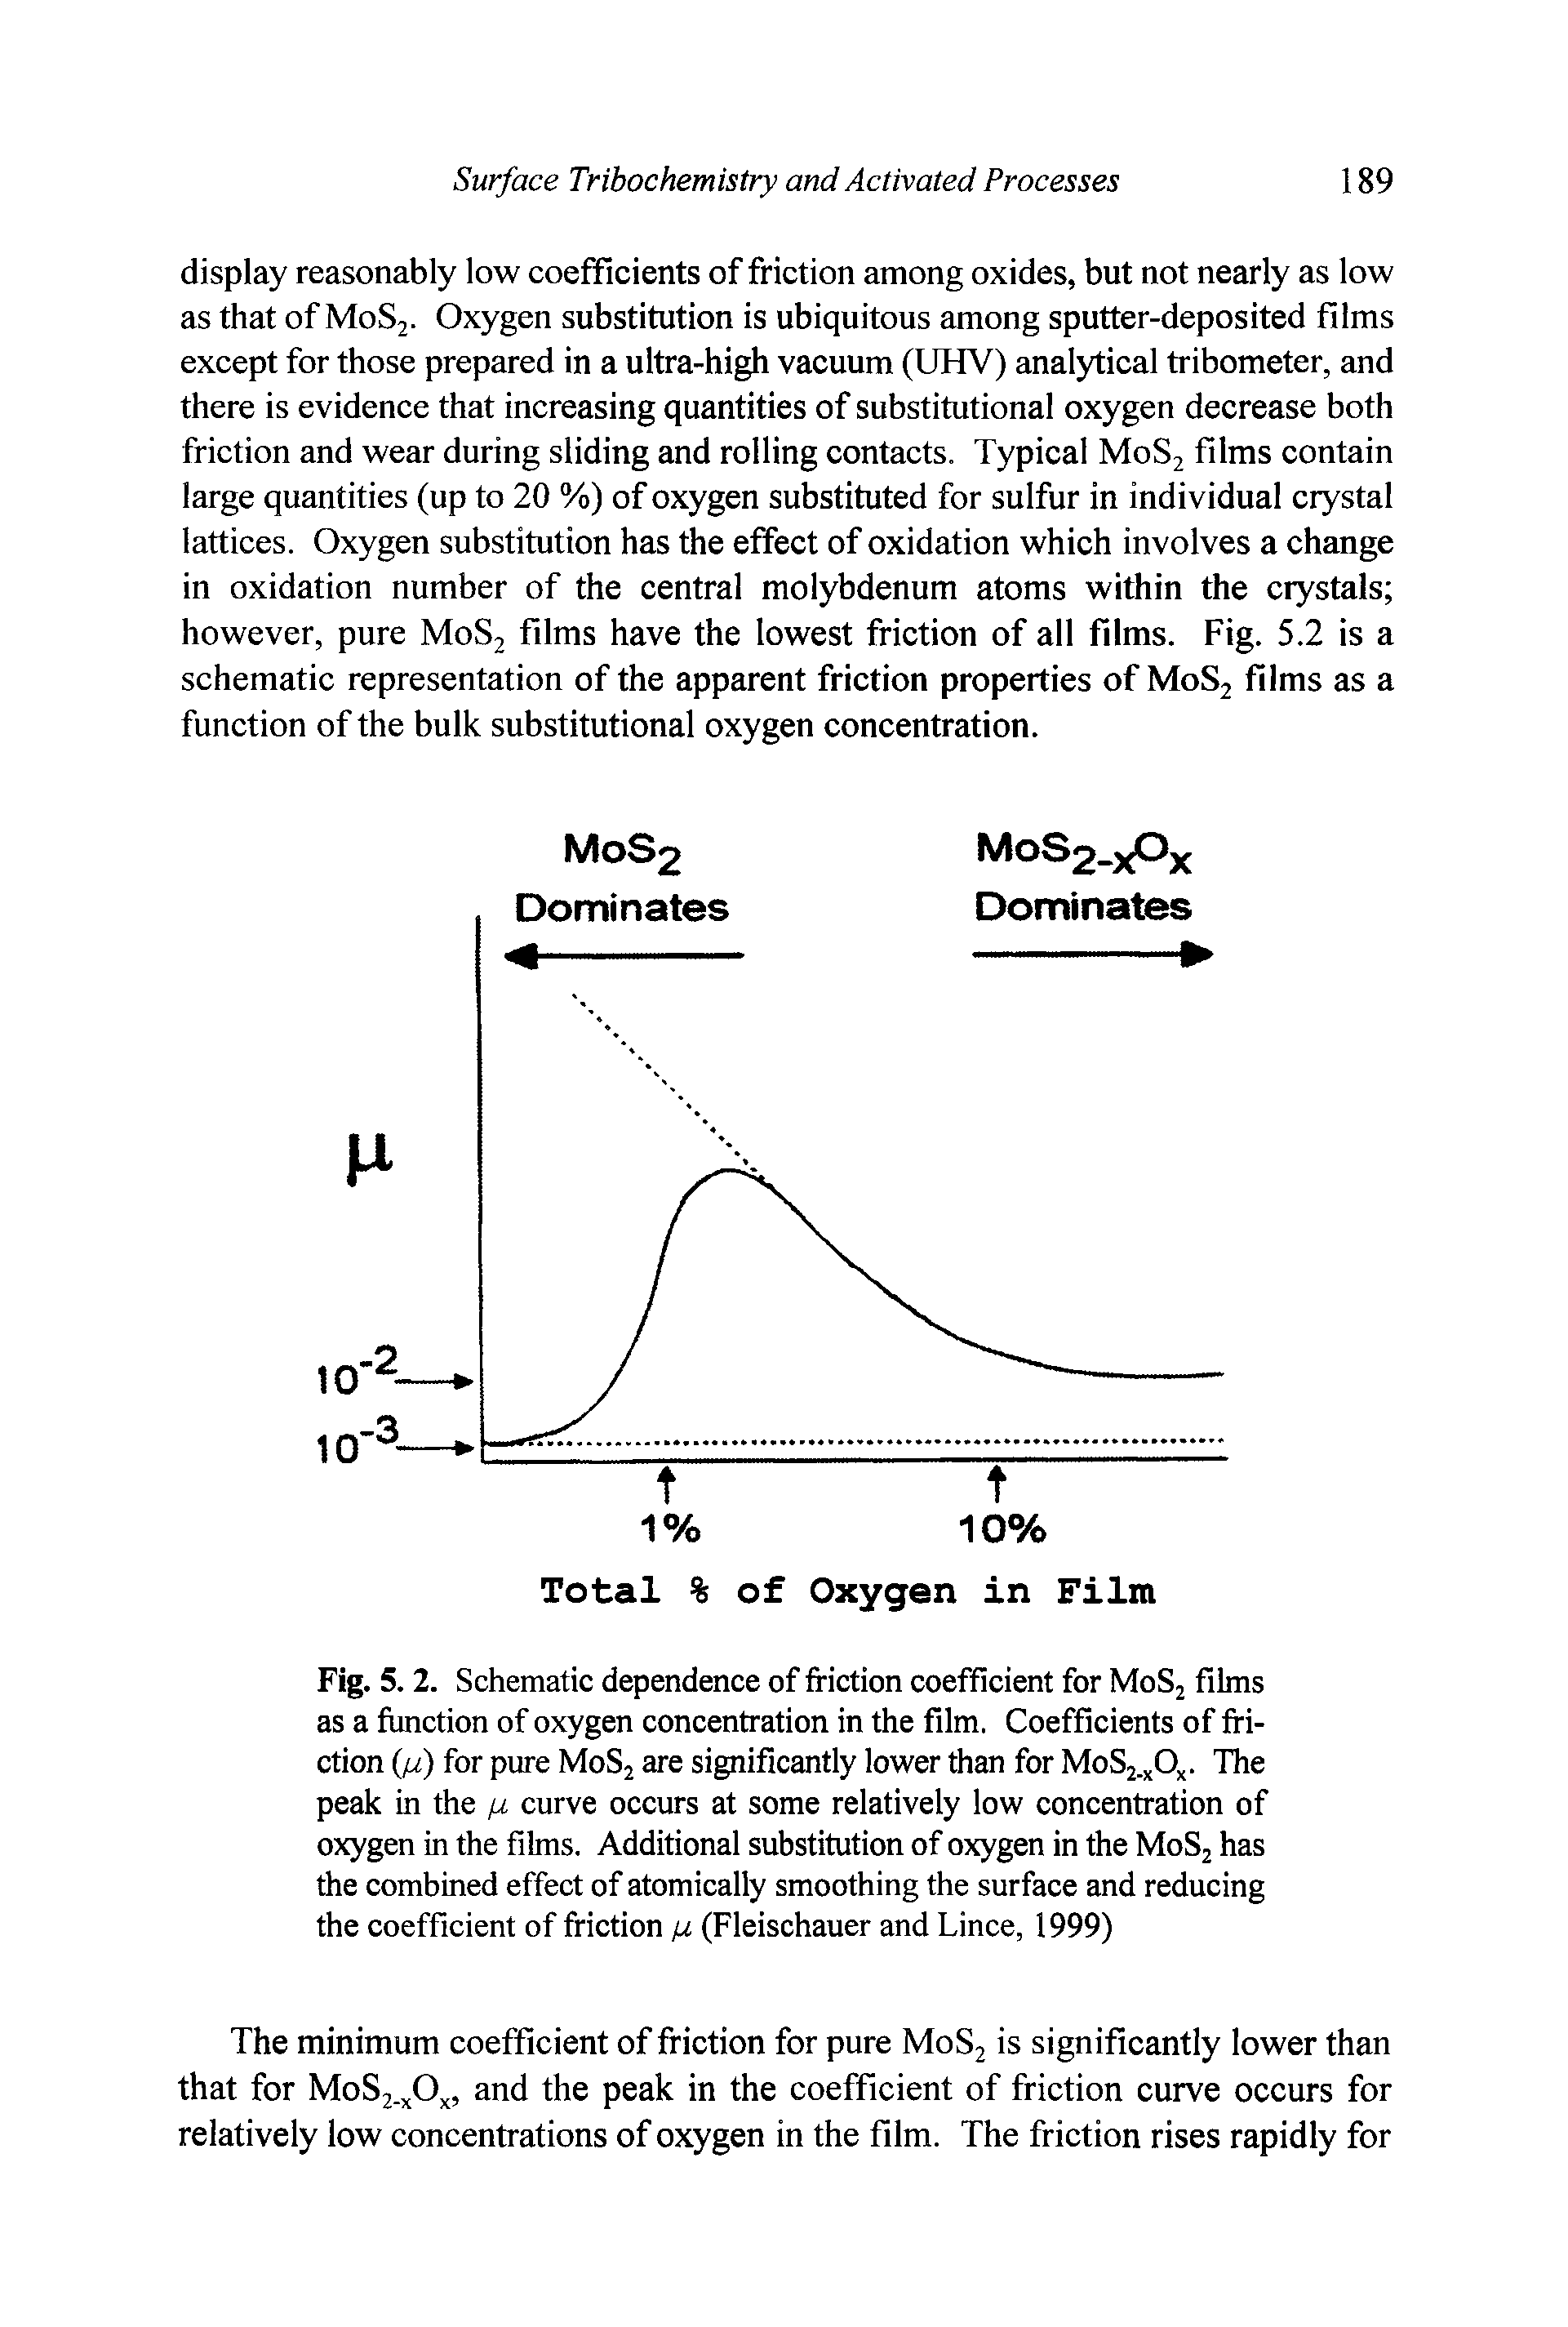 Fig. 5. 2. Schematic dependence of friction coefficient for MoS2 films as a function of oxygen concentration in the film. Coefficients of friction (pi) for pure MoS2 are significantly lower than for MoS2.xOx. The peak in the pi curve occurs at some relatively low concentration of oxygen in the films. Additional substitution of oxygen in the MoS2 has the combined effect of atomically smoothing the surface and reducing the coefficient of friction pi (Fleischauer and Lince, 1999)...